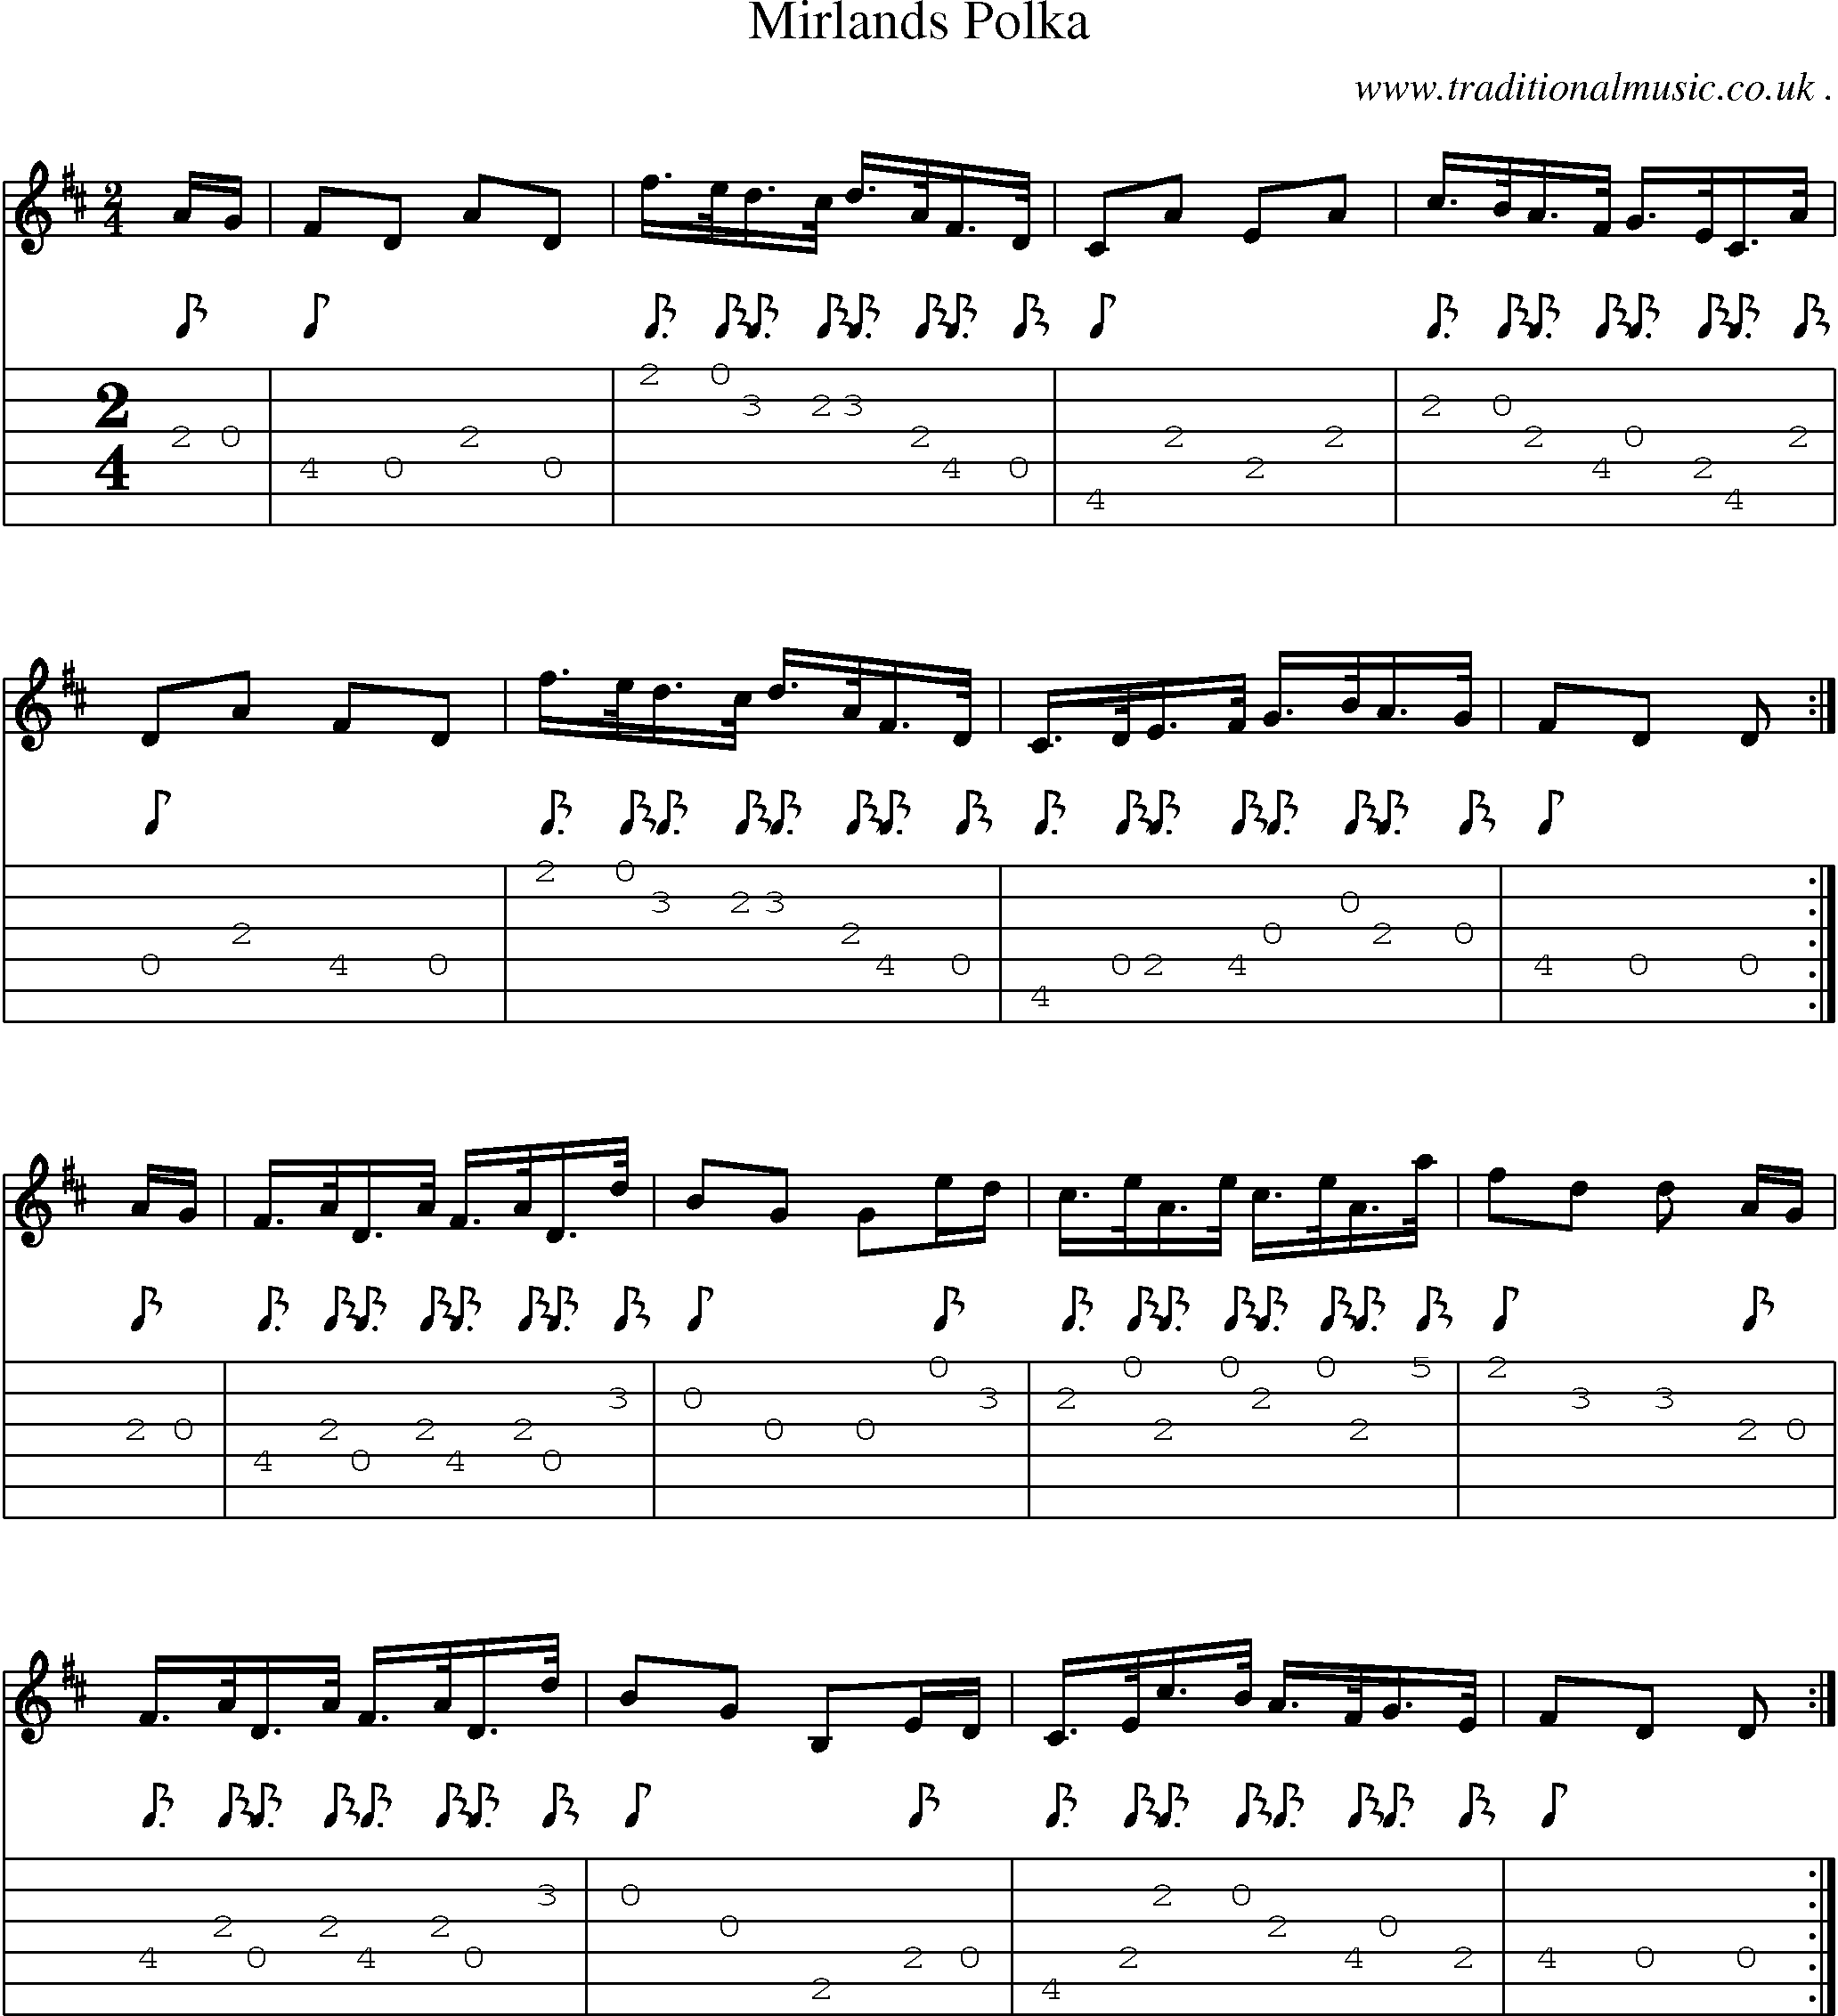 Sheet-music  score, Chords and Guitar Tabs for Mirlands Polka